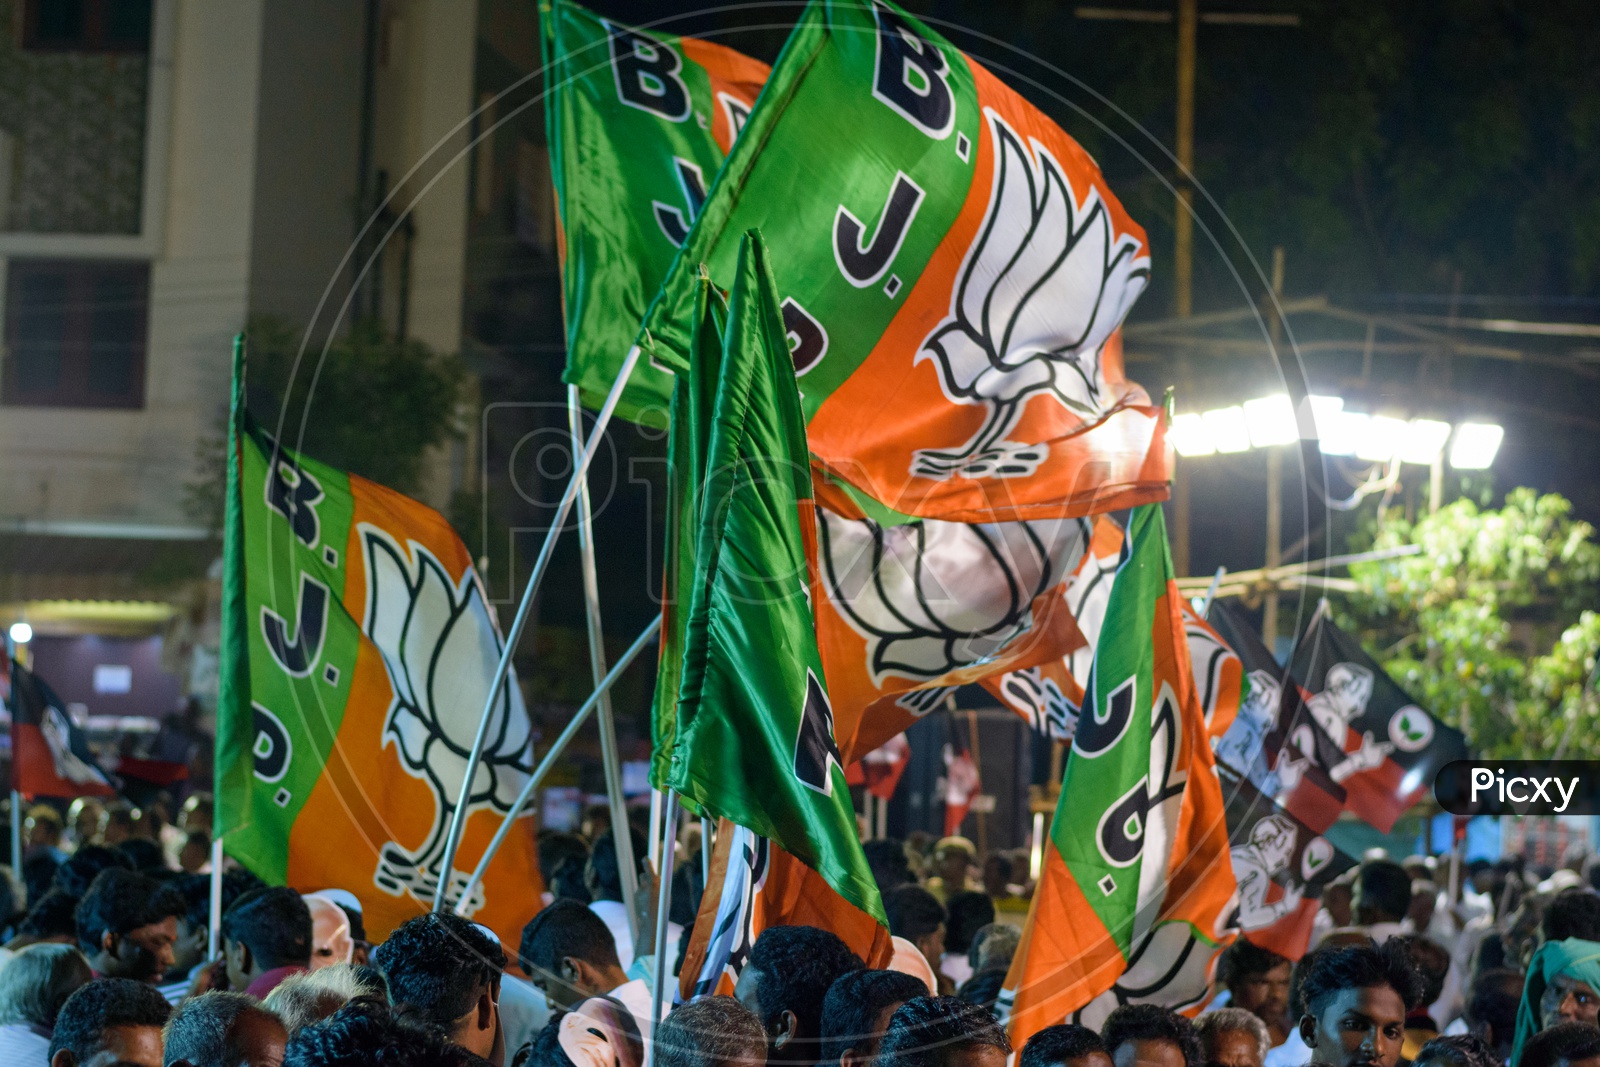 BJP cadres holding the BJP flag for a loksabha campaign